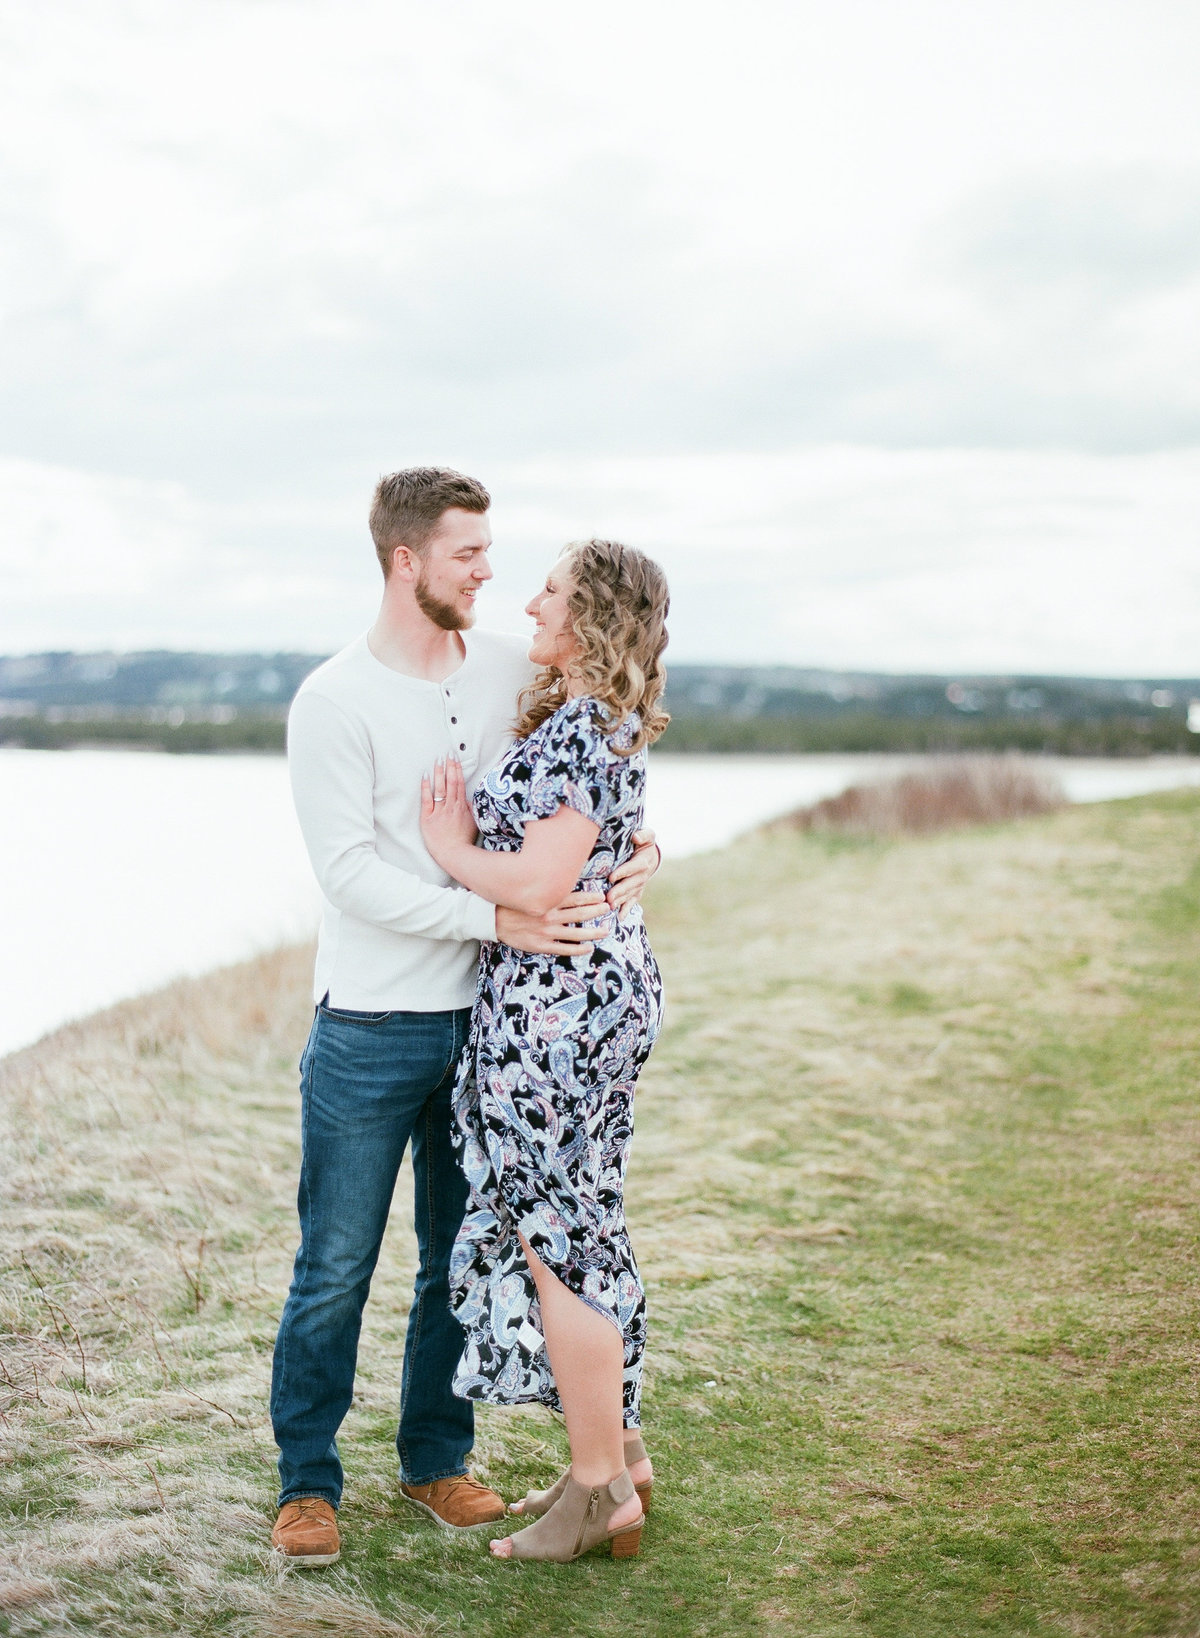 Jacqueline Anne Photography - Akayla and Andrew - Lawrencetown Beach-48